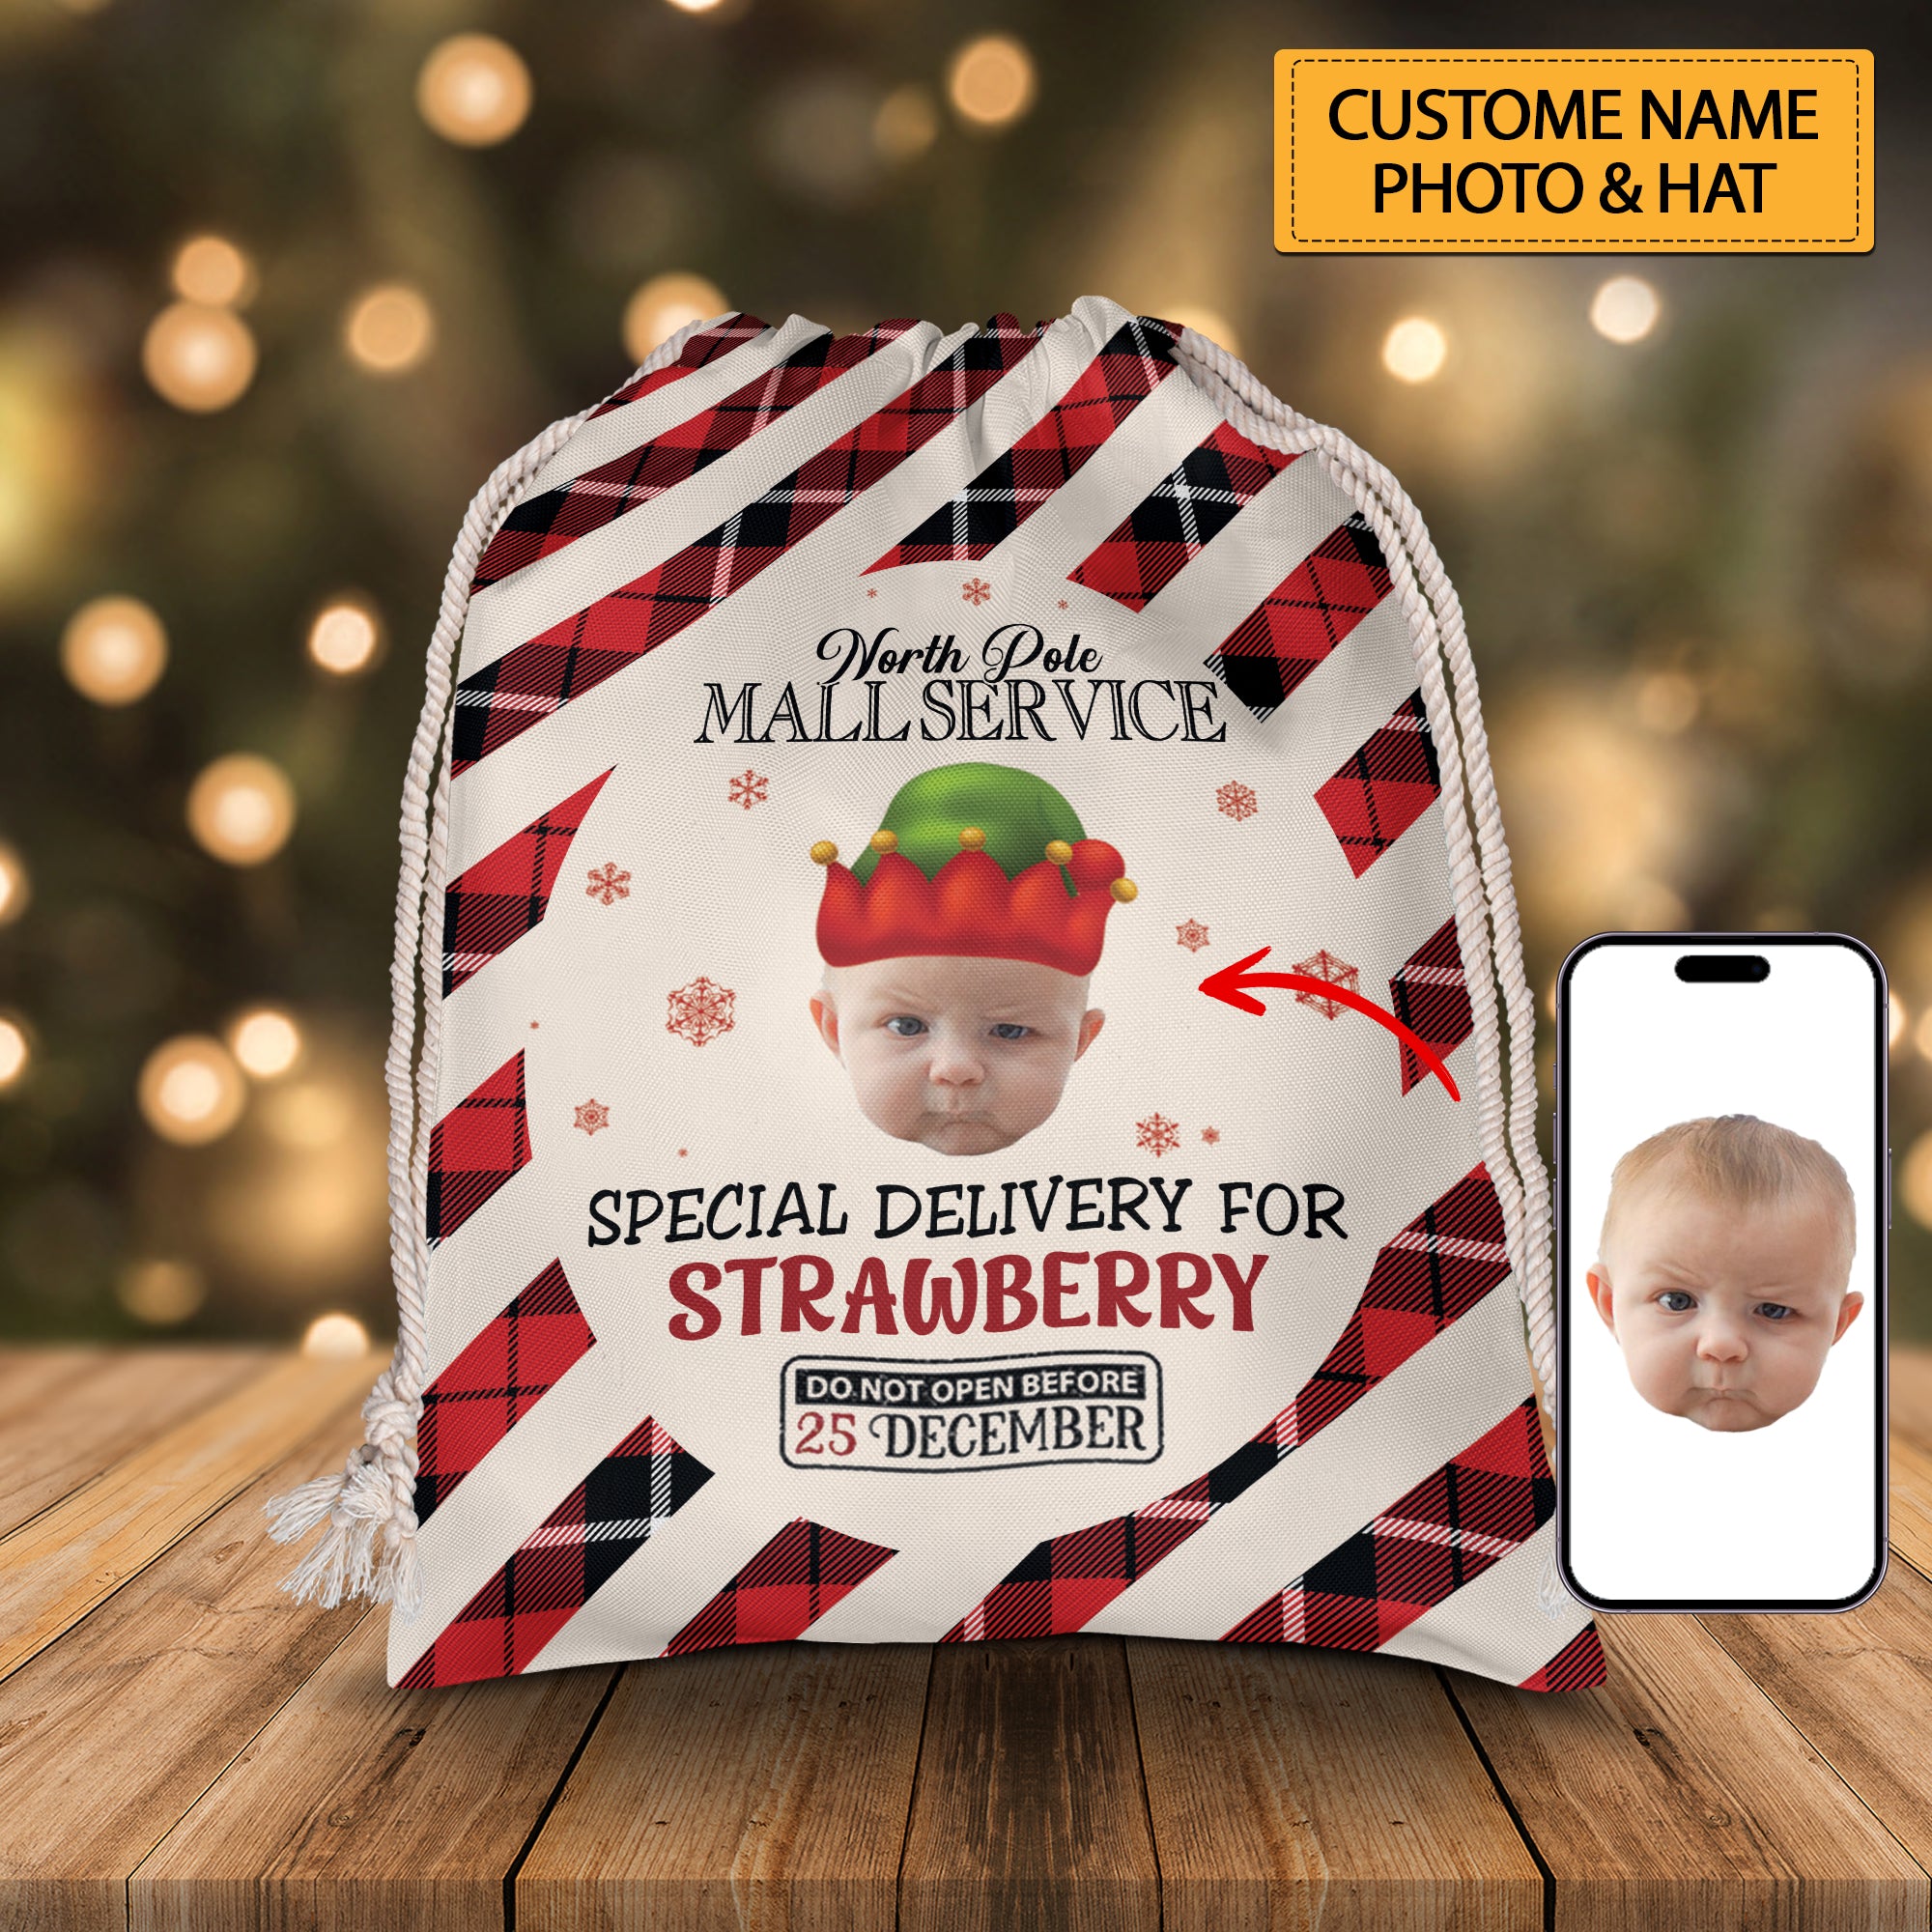 North Pole Mall Service Special Delivery For - Personalized String Bag, Christmas Gift, Gift For Family